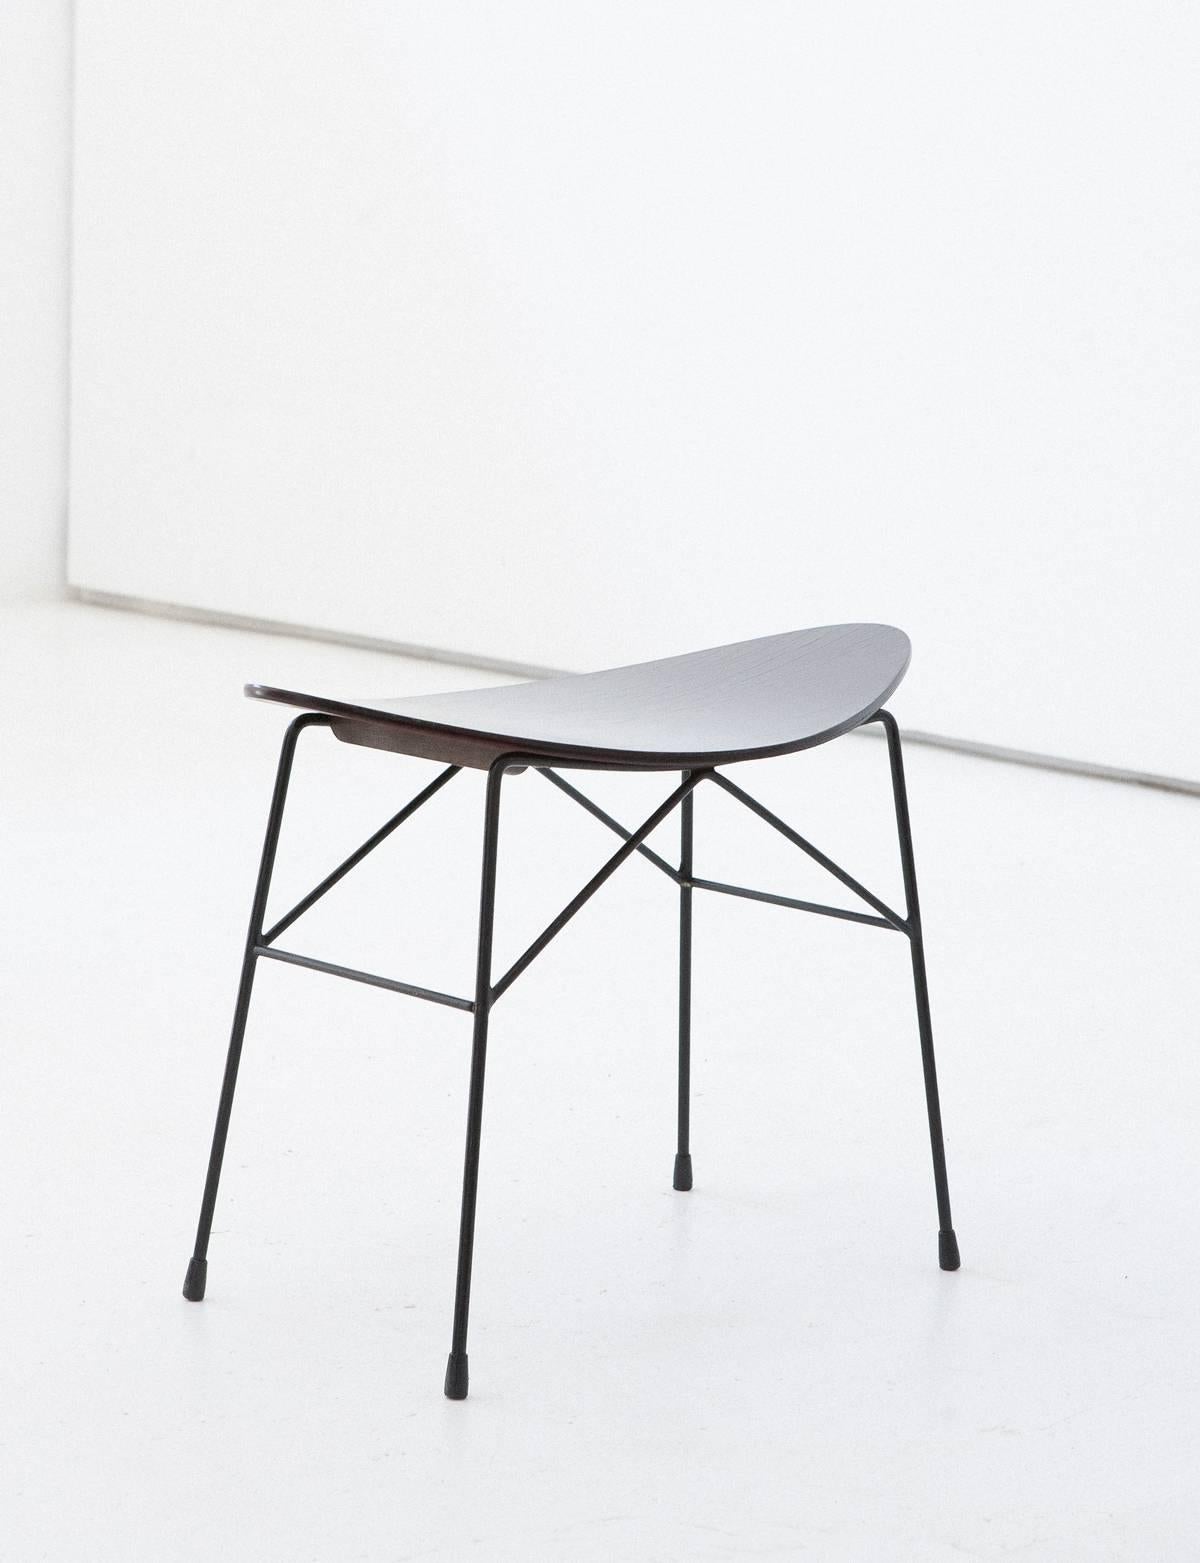 A modern bench manufactured in Italy by '' Pizzetti Roma '' in 1950's (original logo visible under the seat )
Iron frame and stained curved seat 
The design recall the hand of Augusto Bozzi 